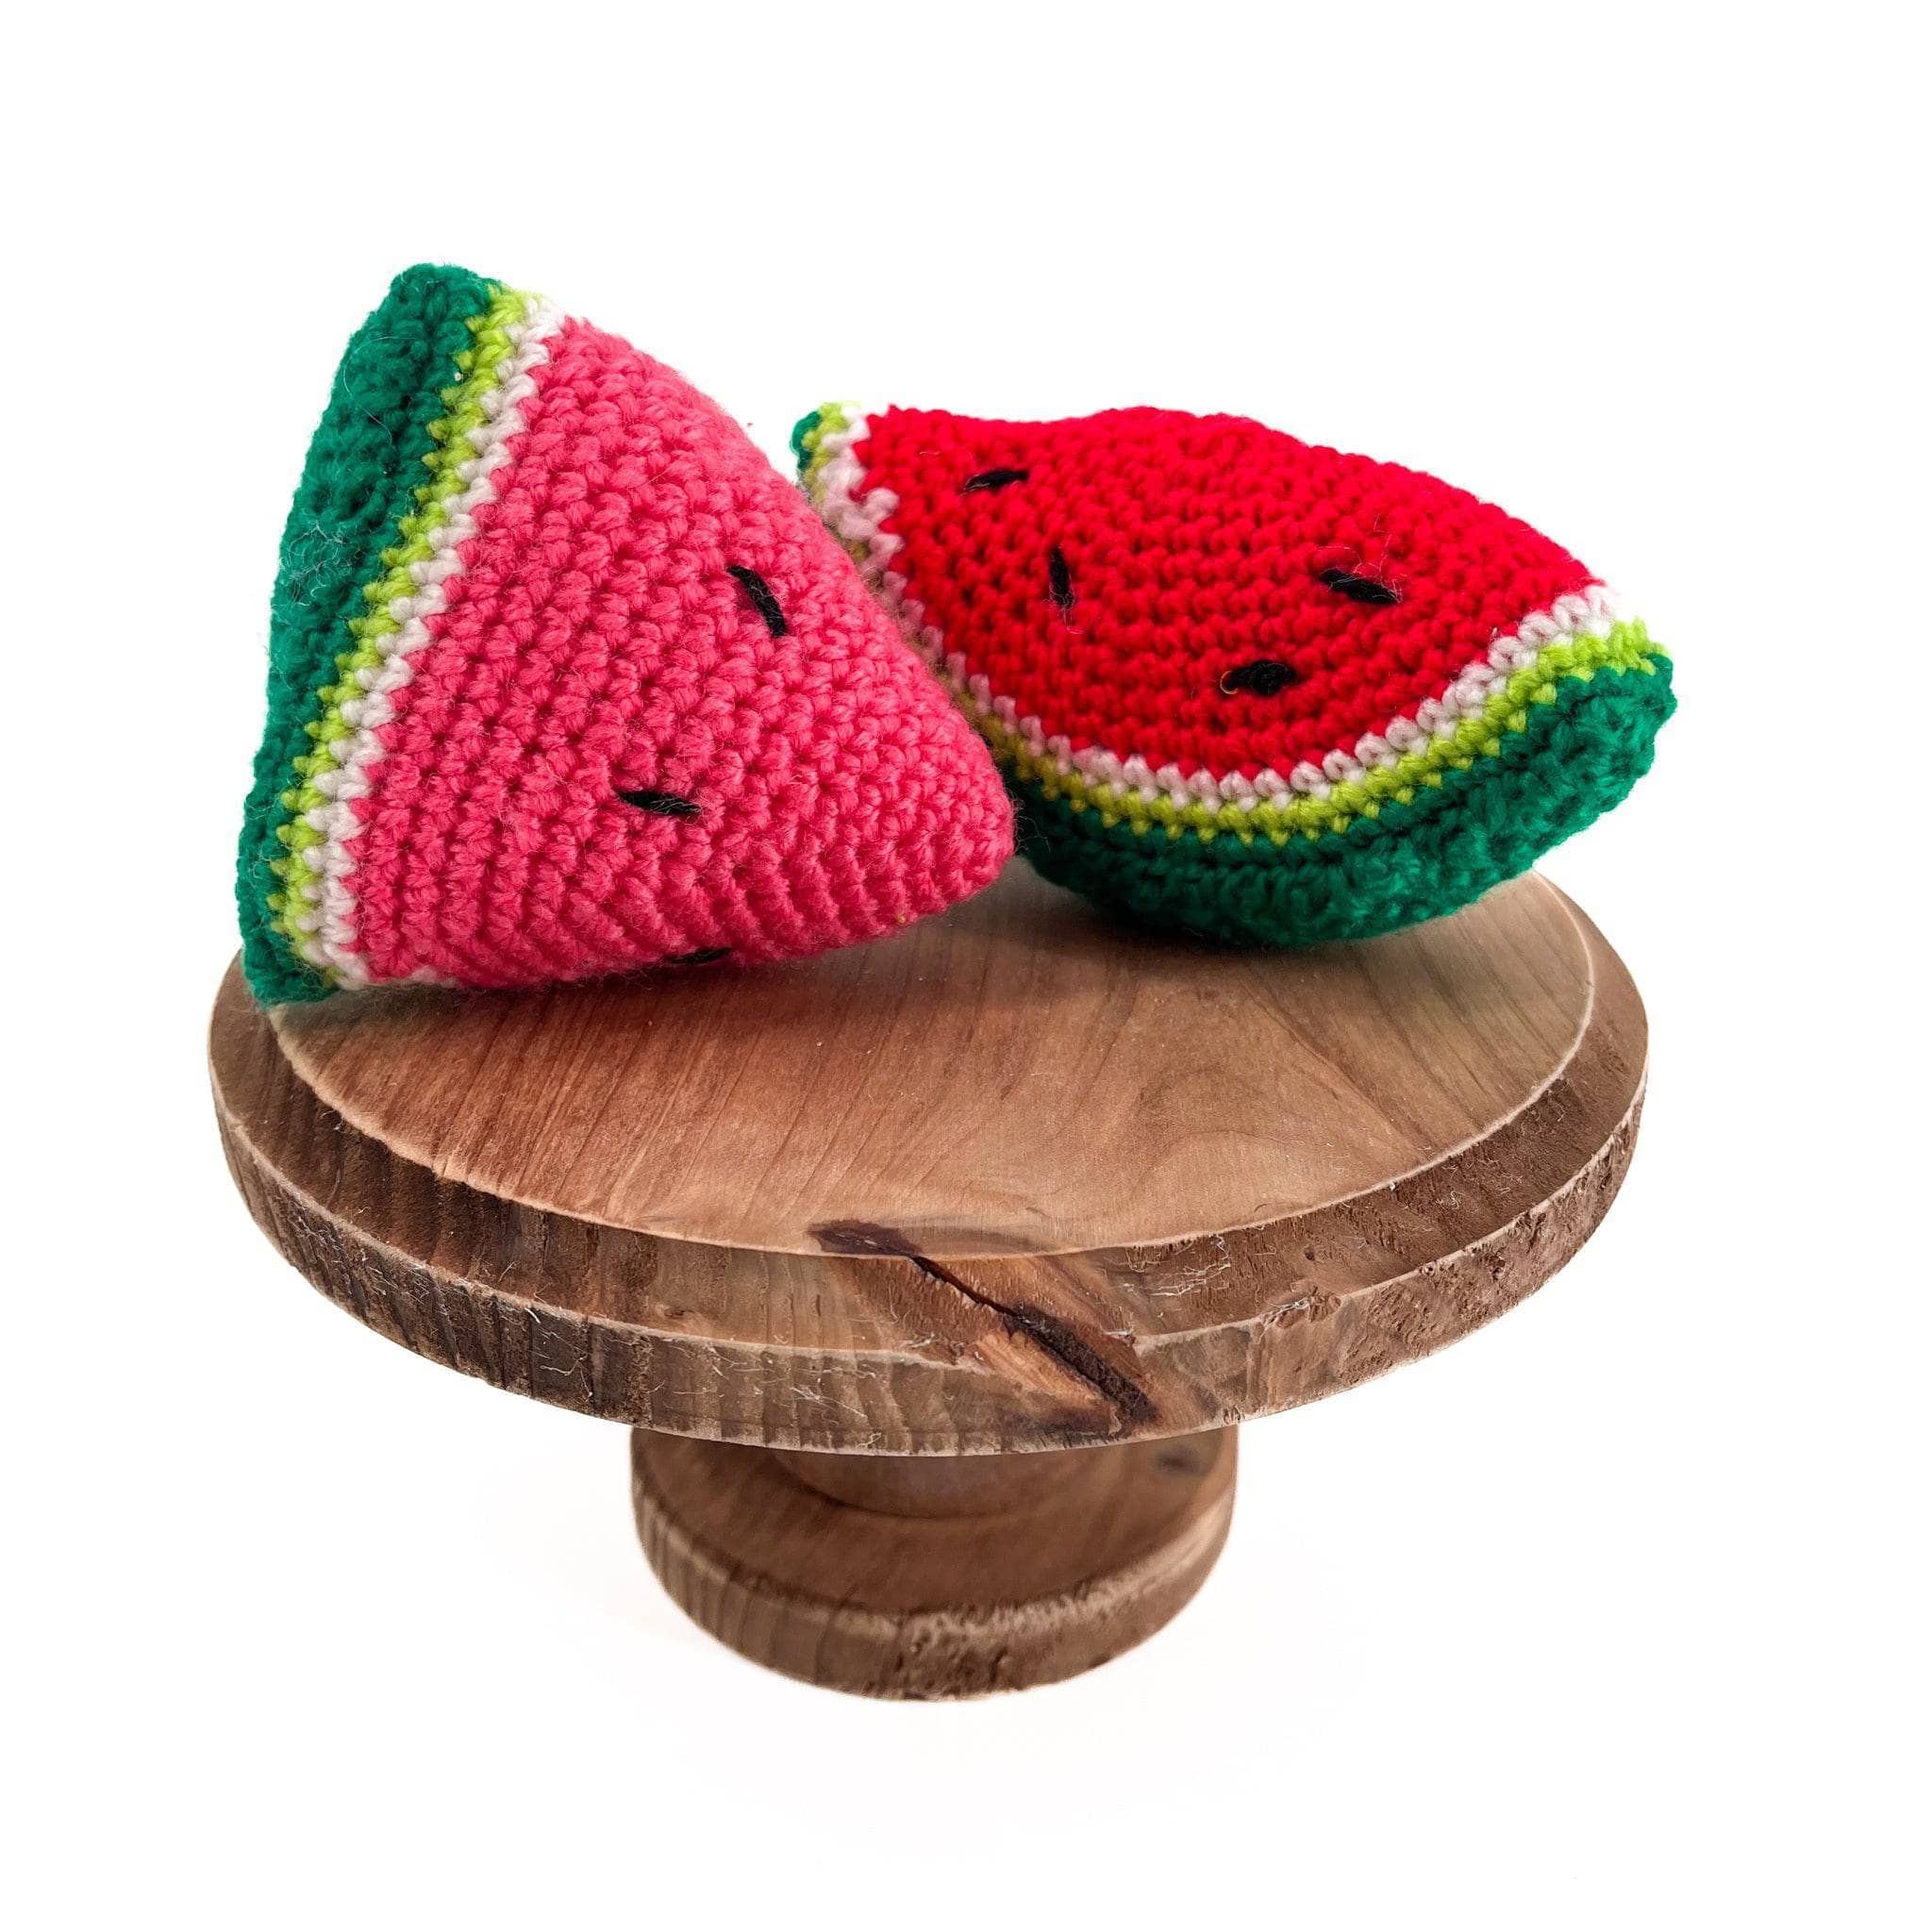 Juicy Watermelon Amigurumi Kit - Ethically Sourced Yarn, Craft Kits, Home Goods, Clothing & Accessories